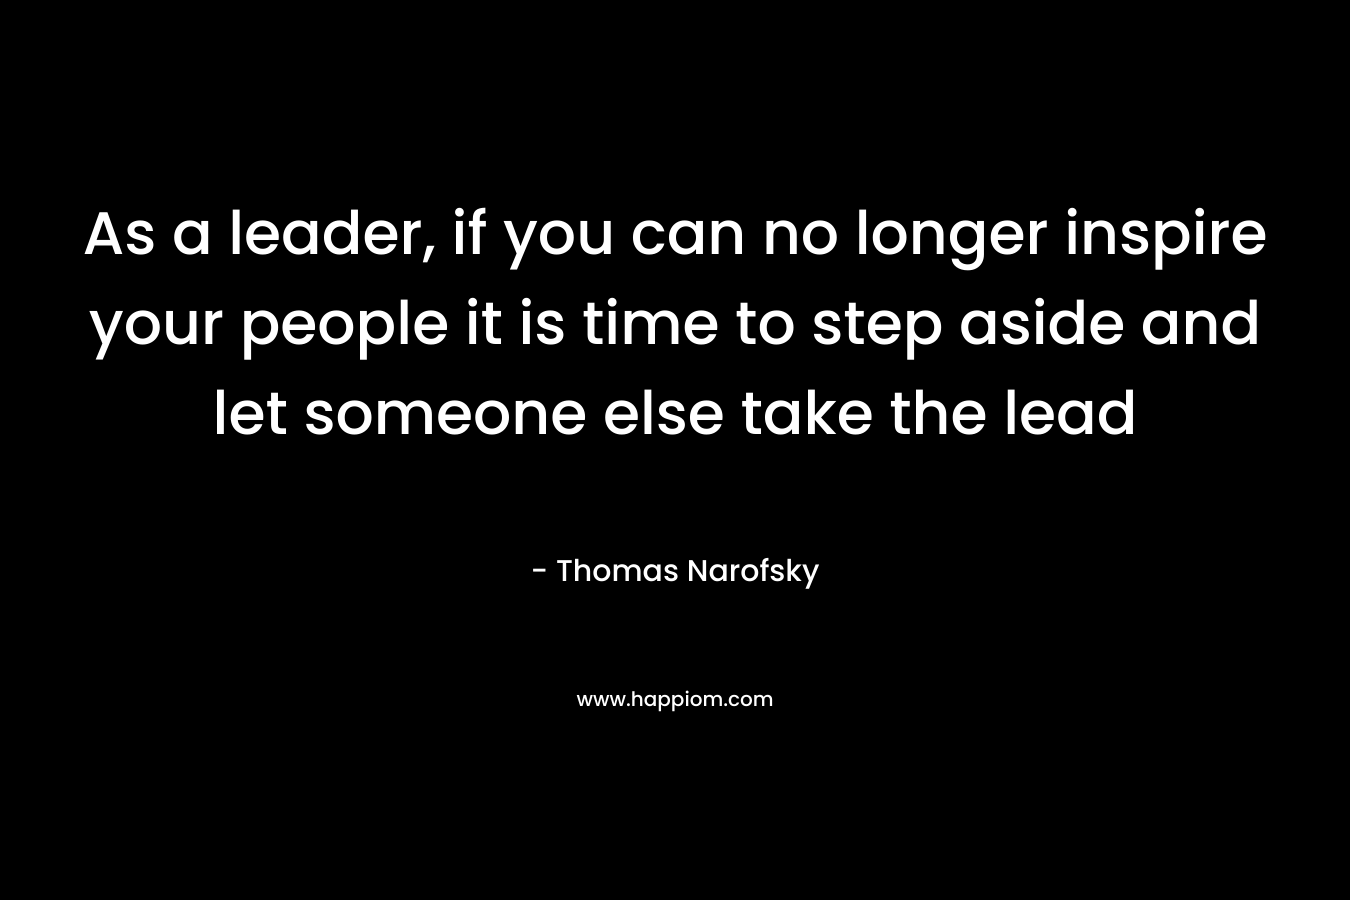 As a leader, if you can no longer inspire your people it is time to step aside and let someone else take the lead – Thomas Narofsky